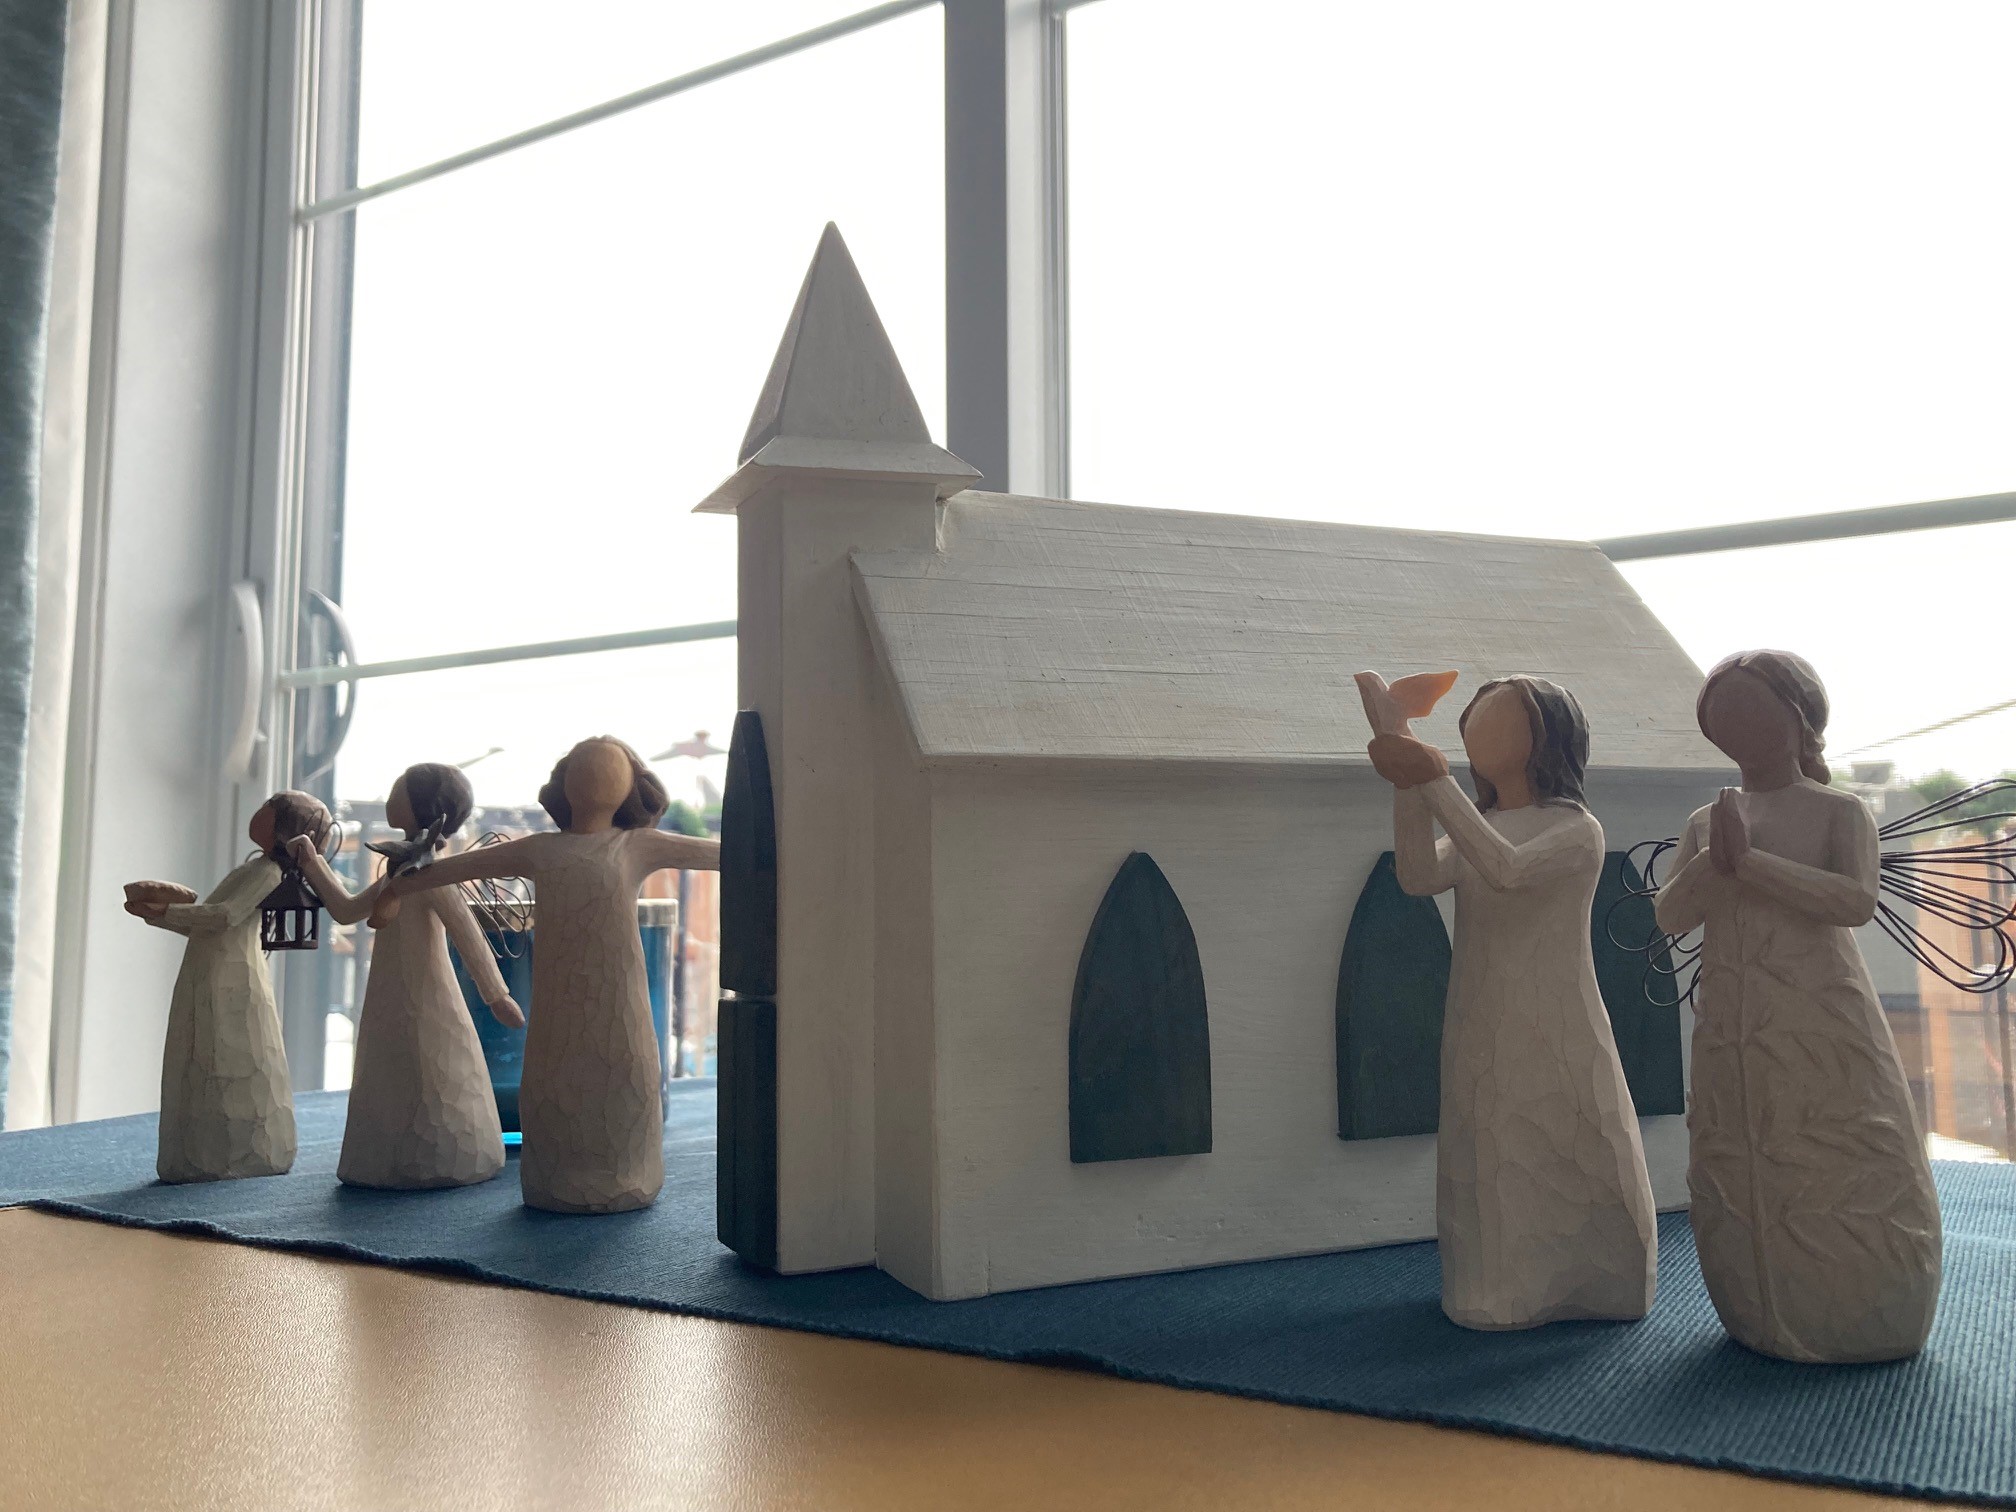 Wooden model of church in front of windows, surrounded by angel figurines